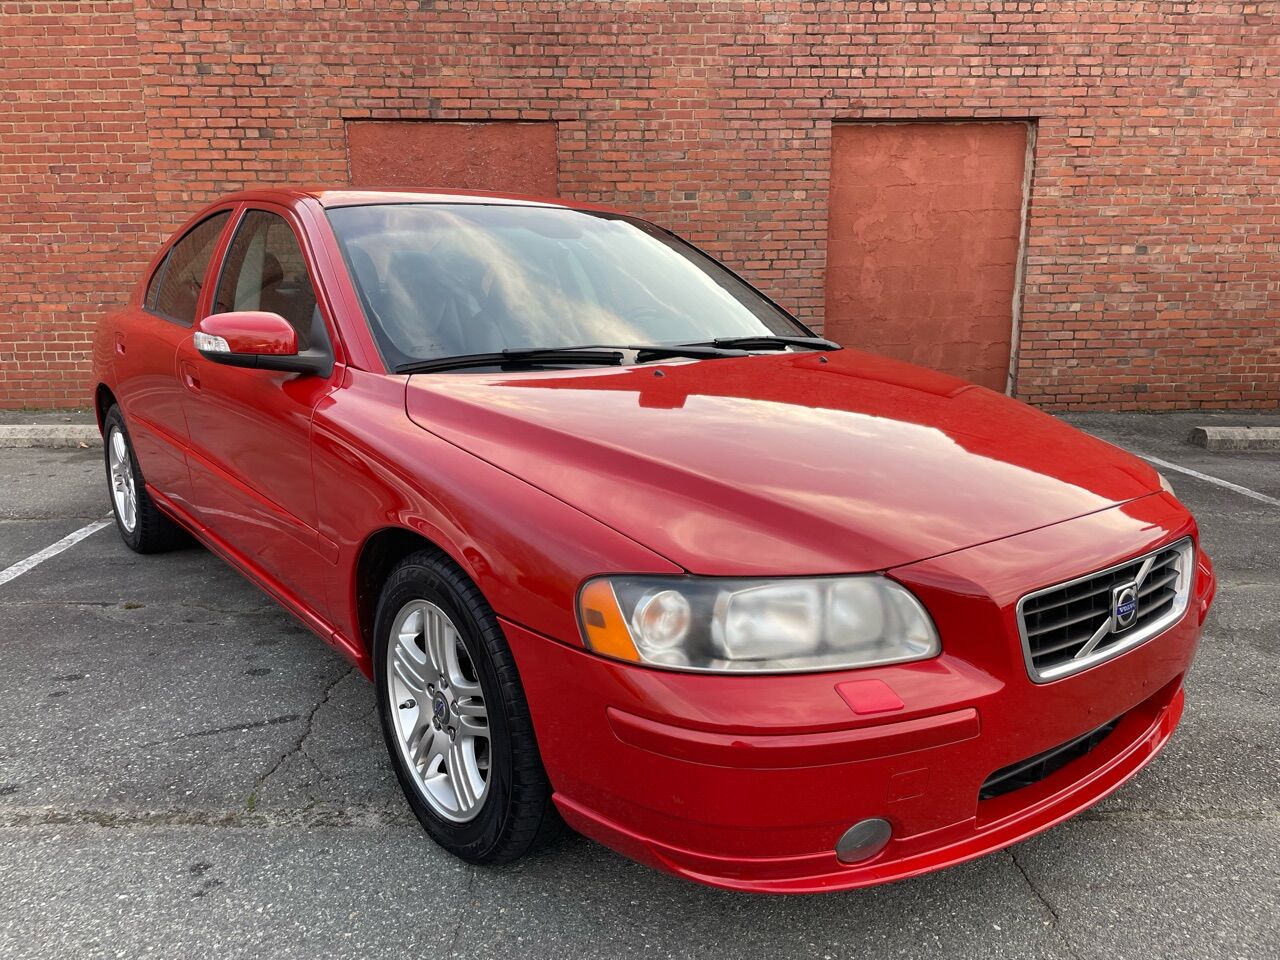 2007 Volvo S60 For Sale In Cary, NC - Carsforsale.com®